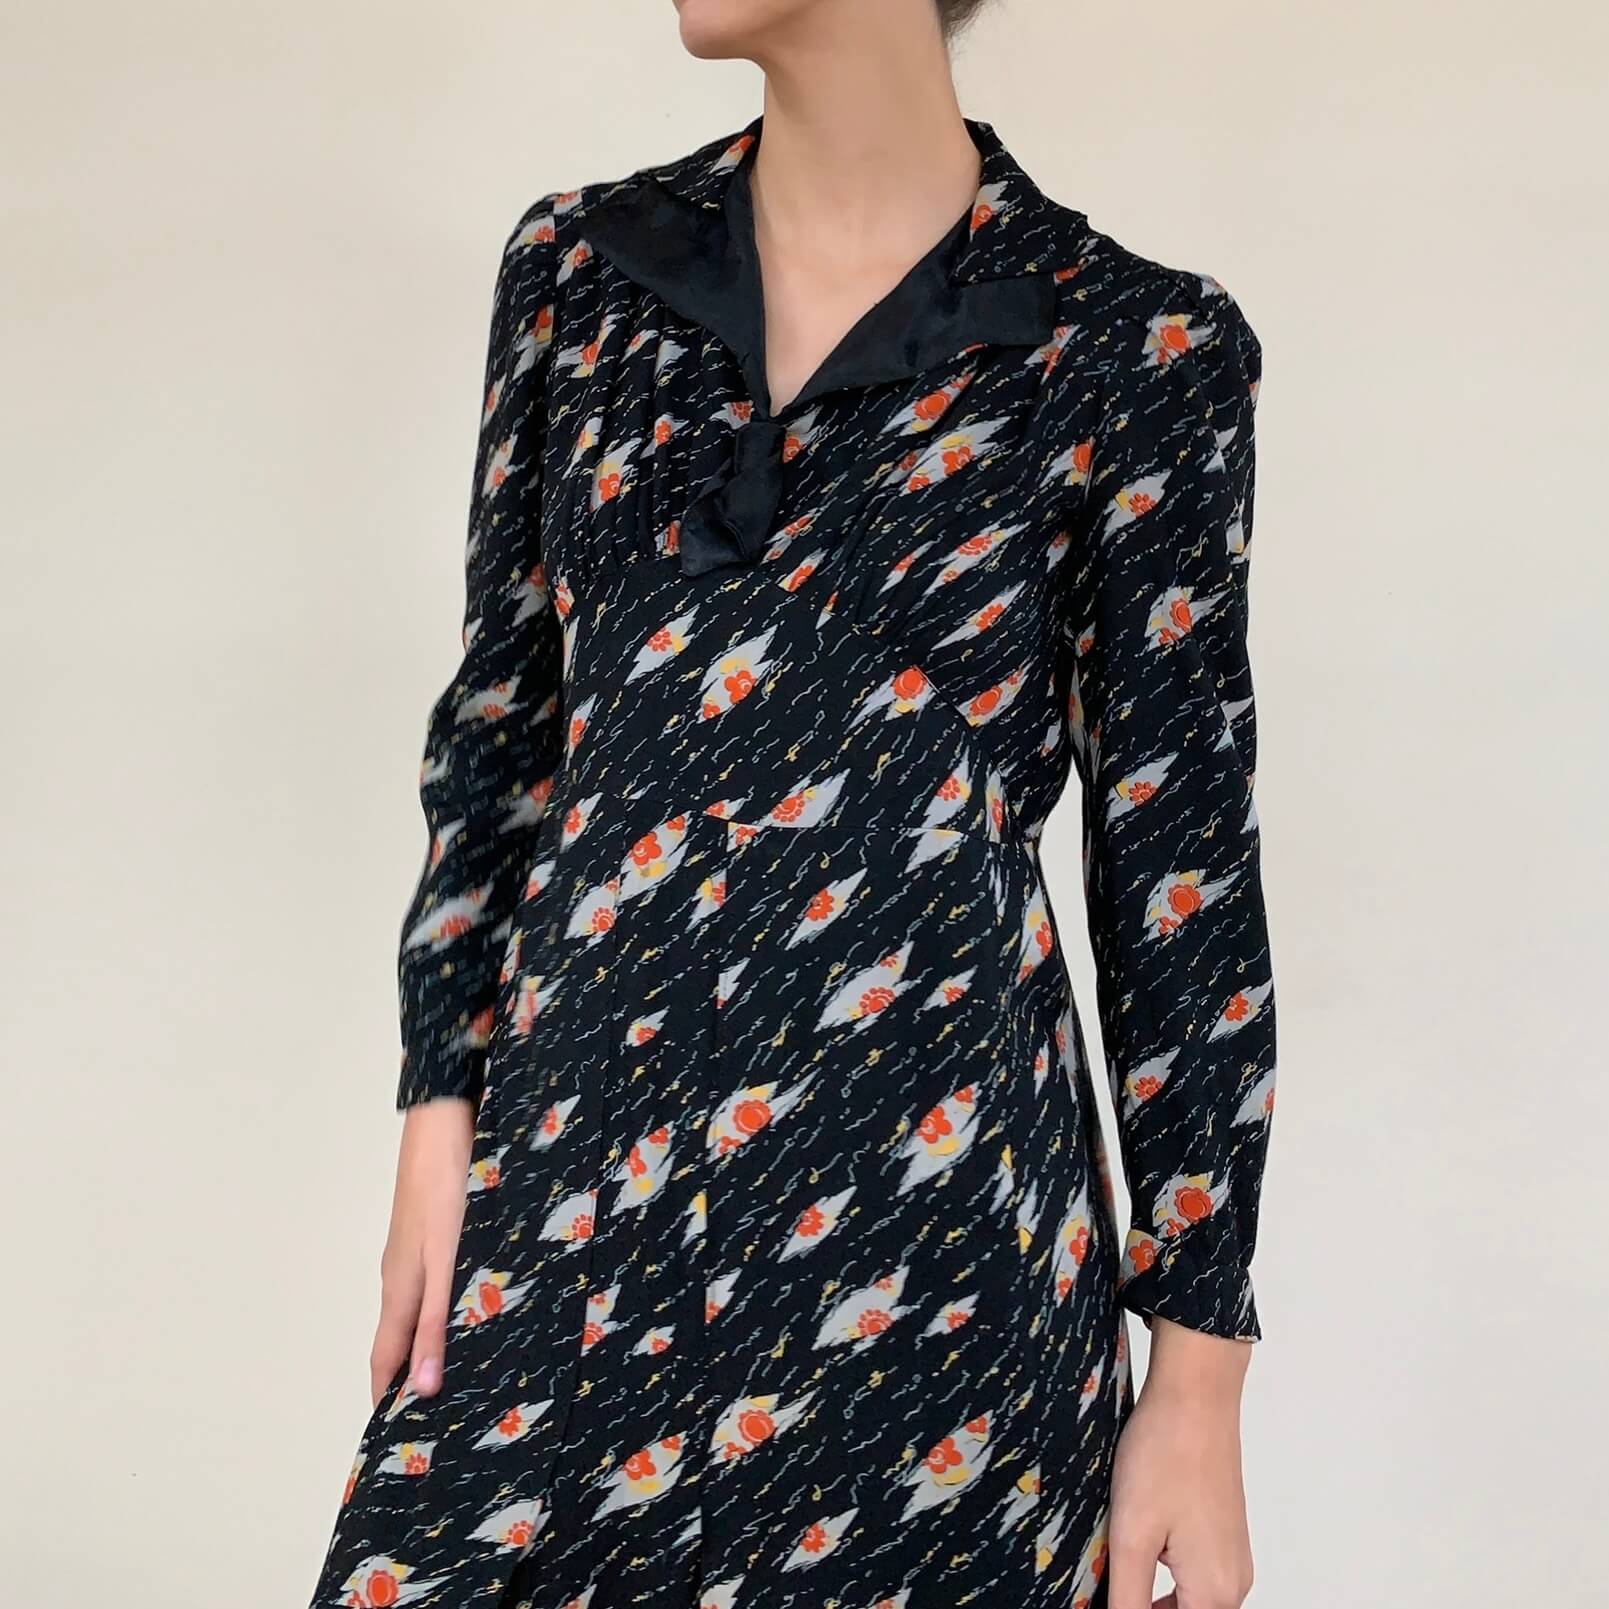 vintage black 1930s dress in a novelty print with a satin collar